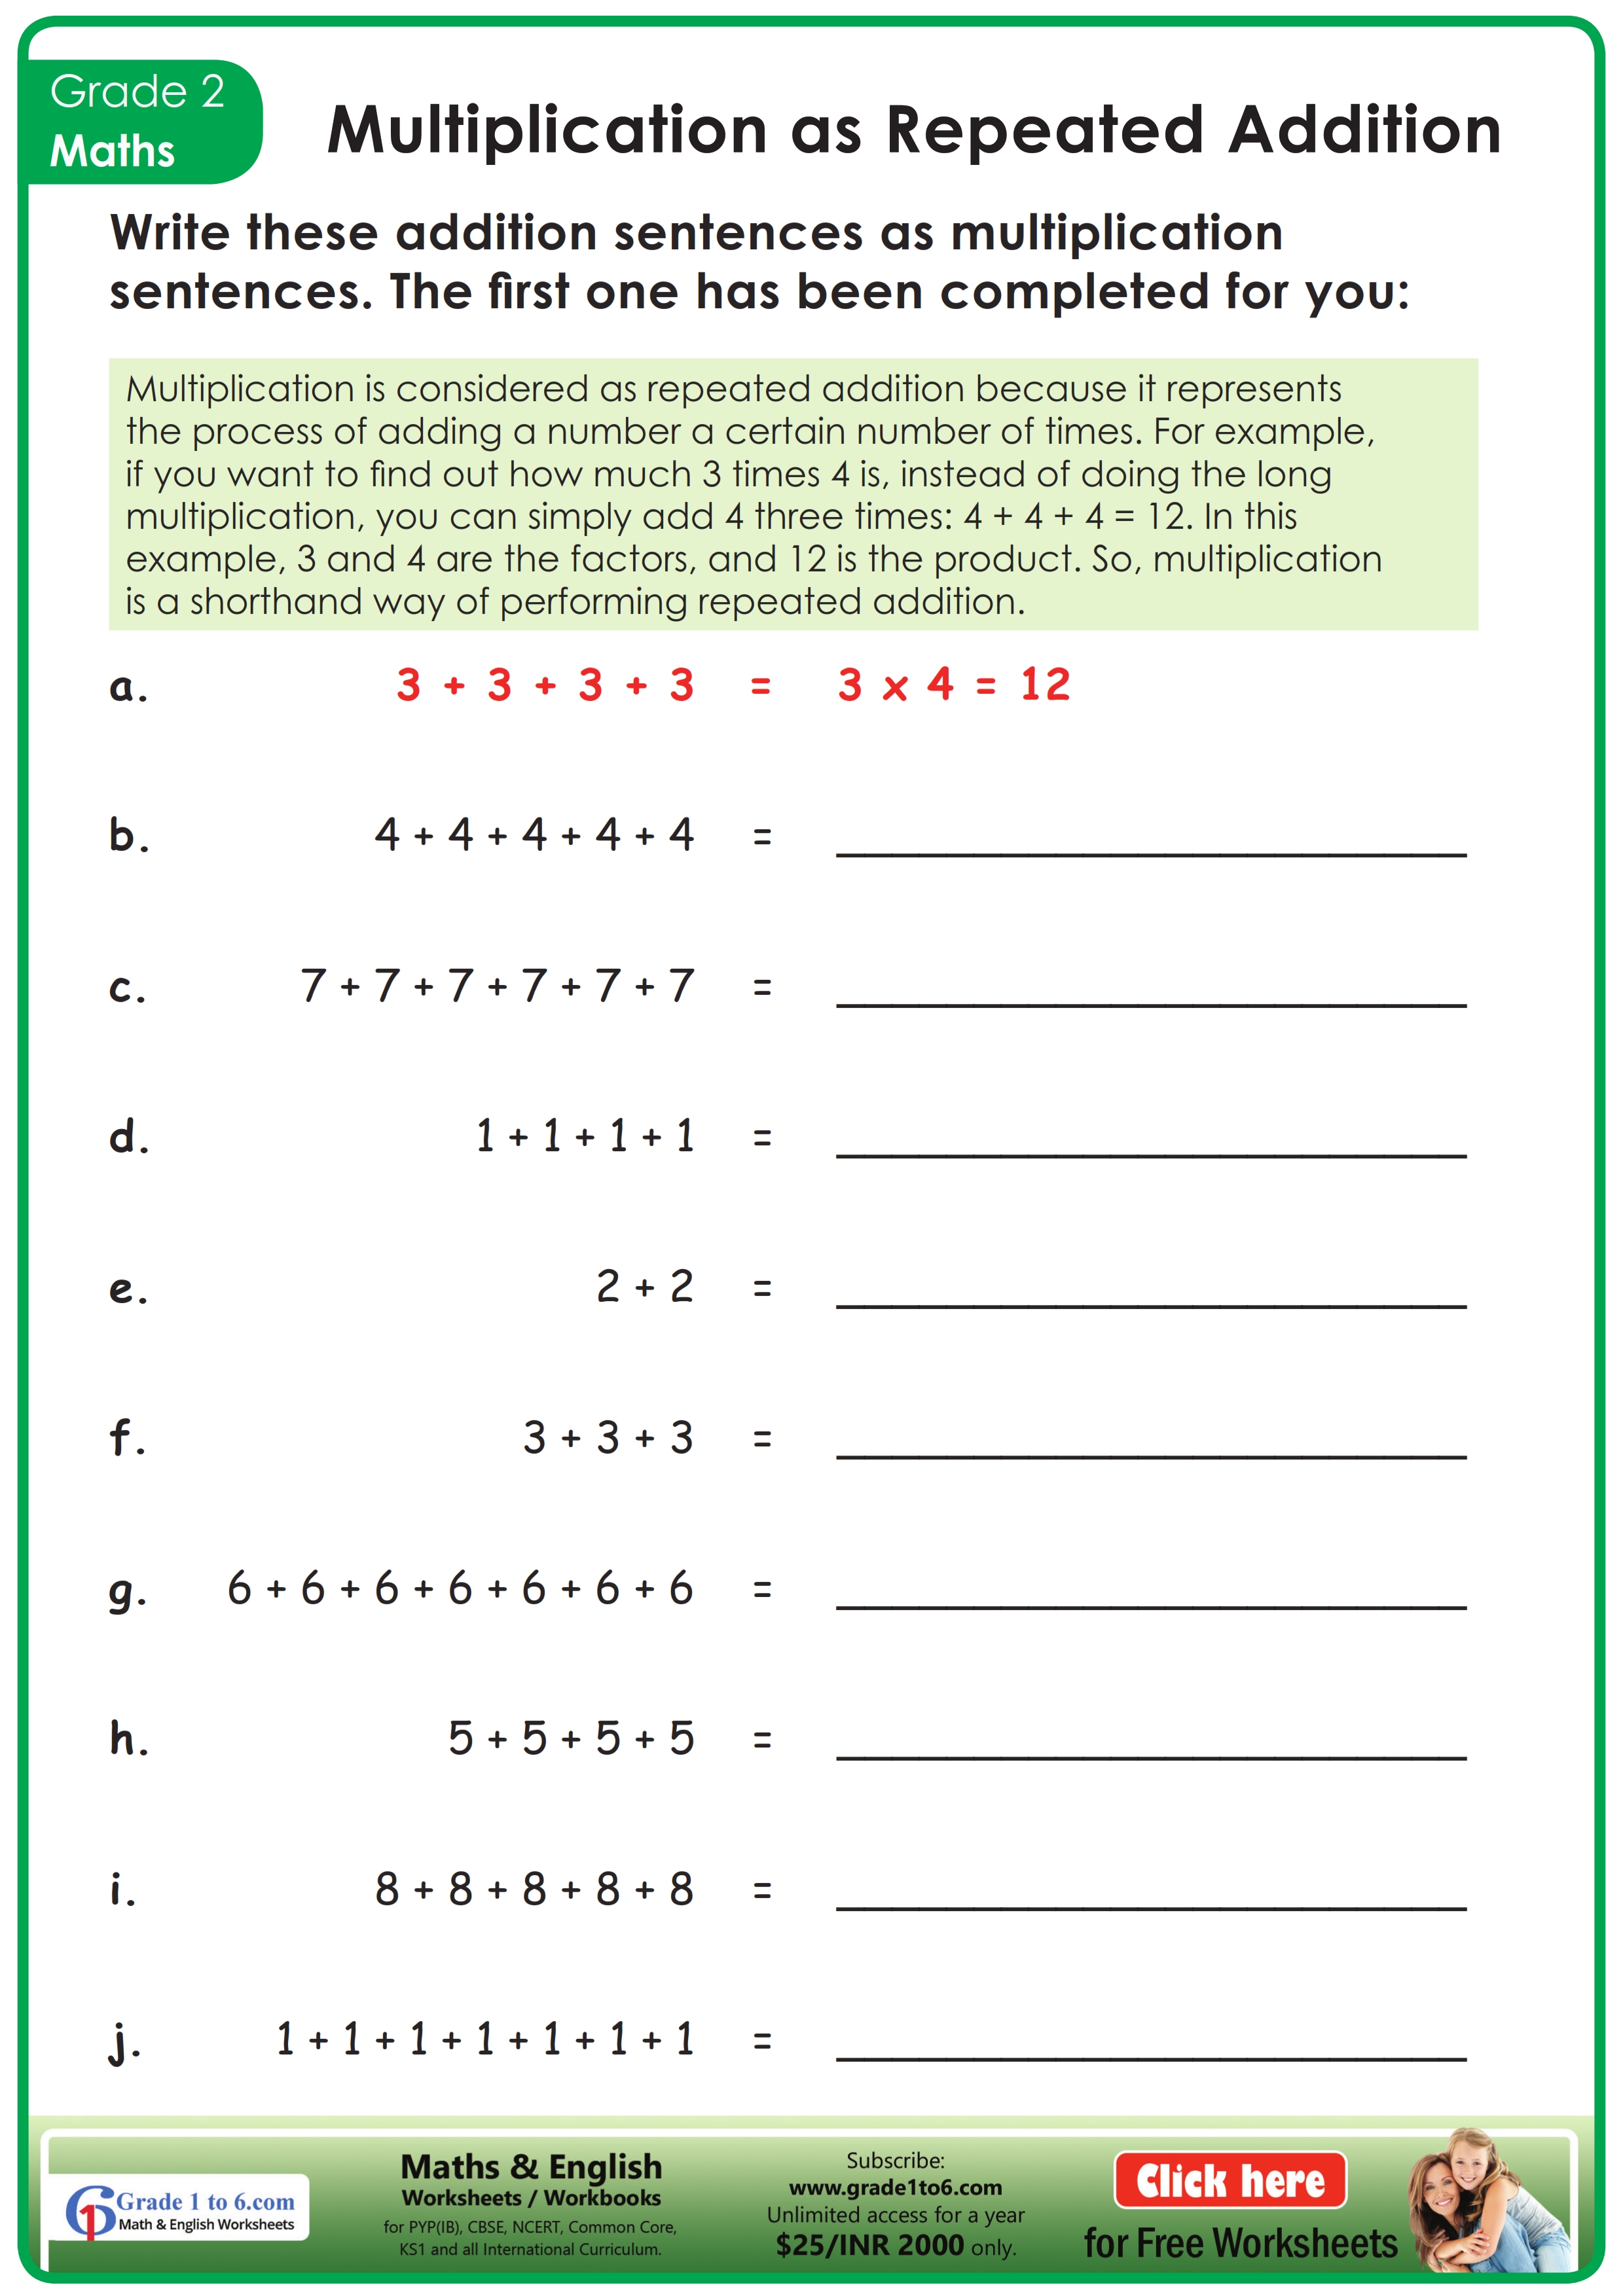 multiplication-as-repeated-addition-worksheet-grade1to6